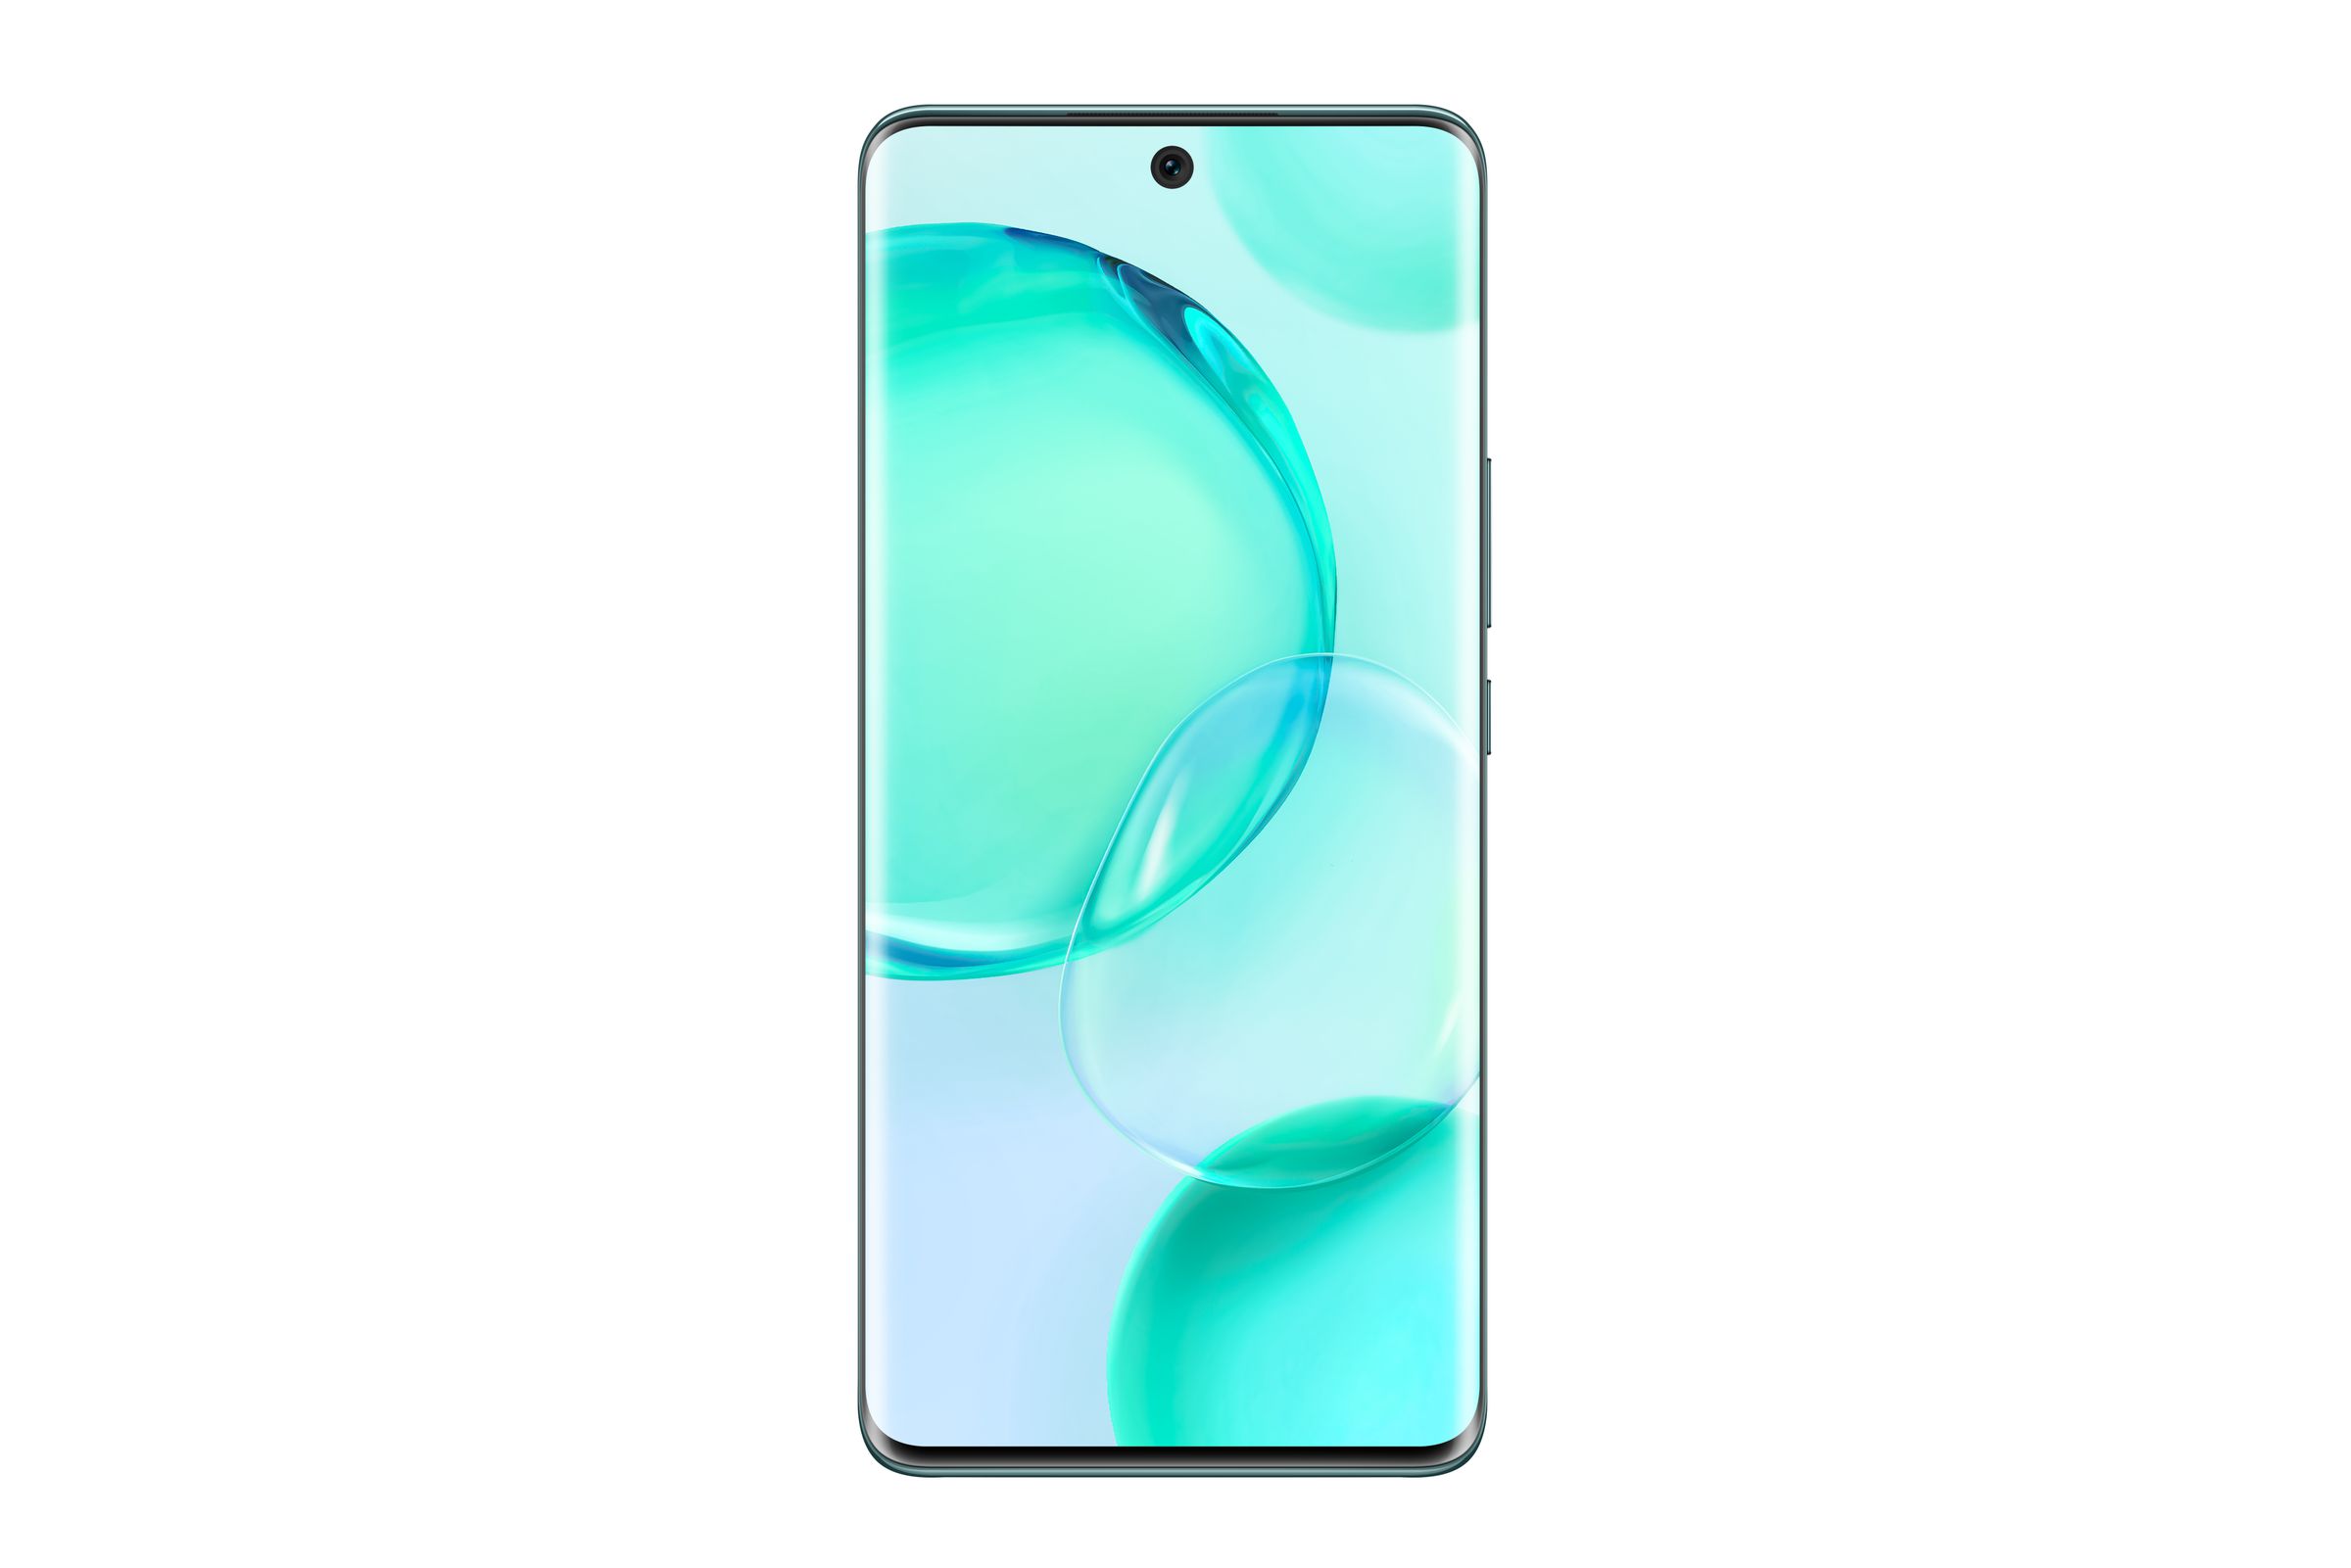 Screen sizes range from 6.57 inches on the Honor 50 (pictured) to 6.72 on the 50 Pro. 